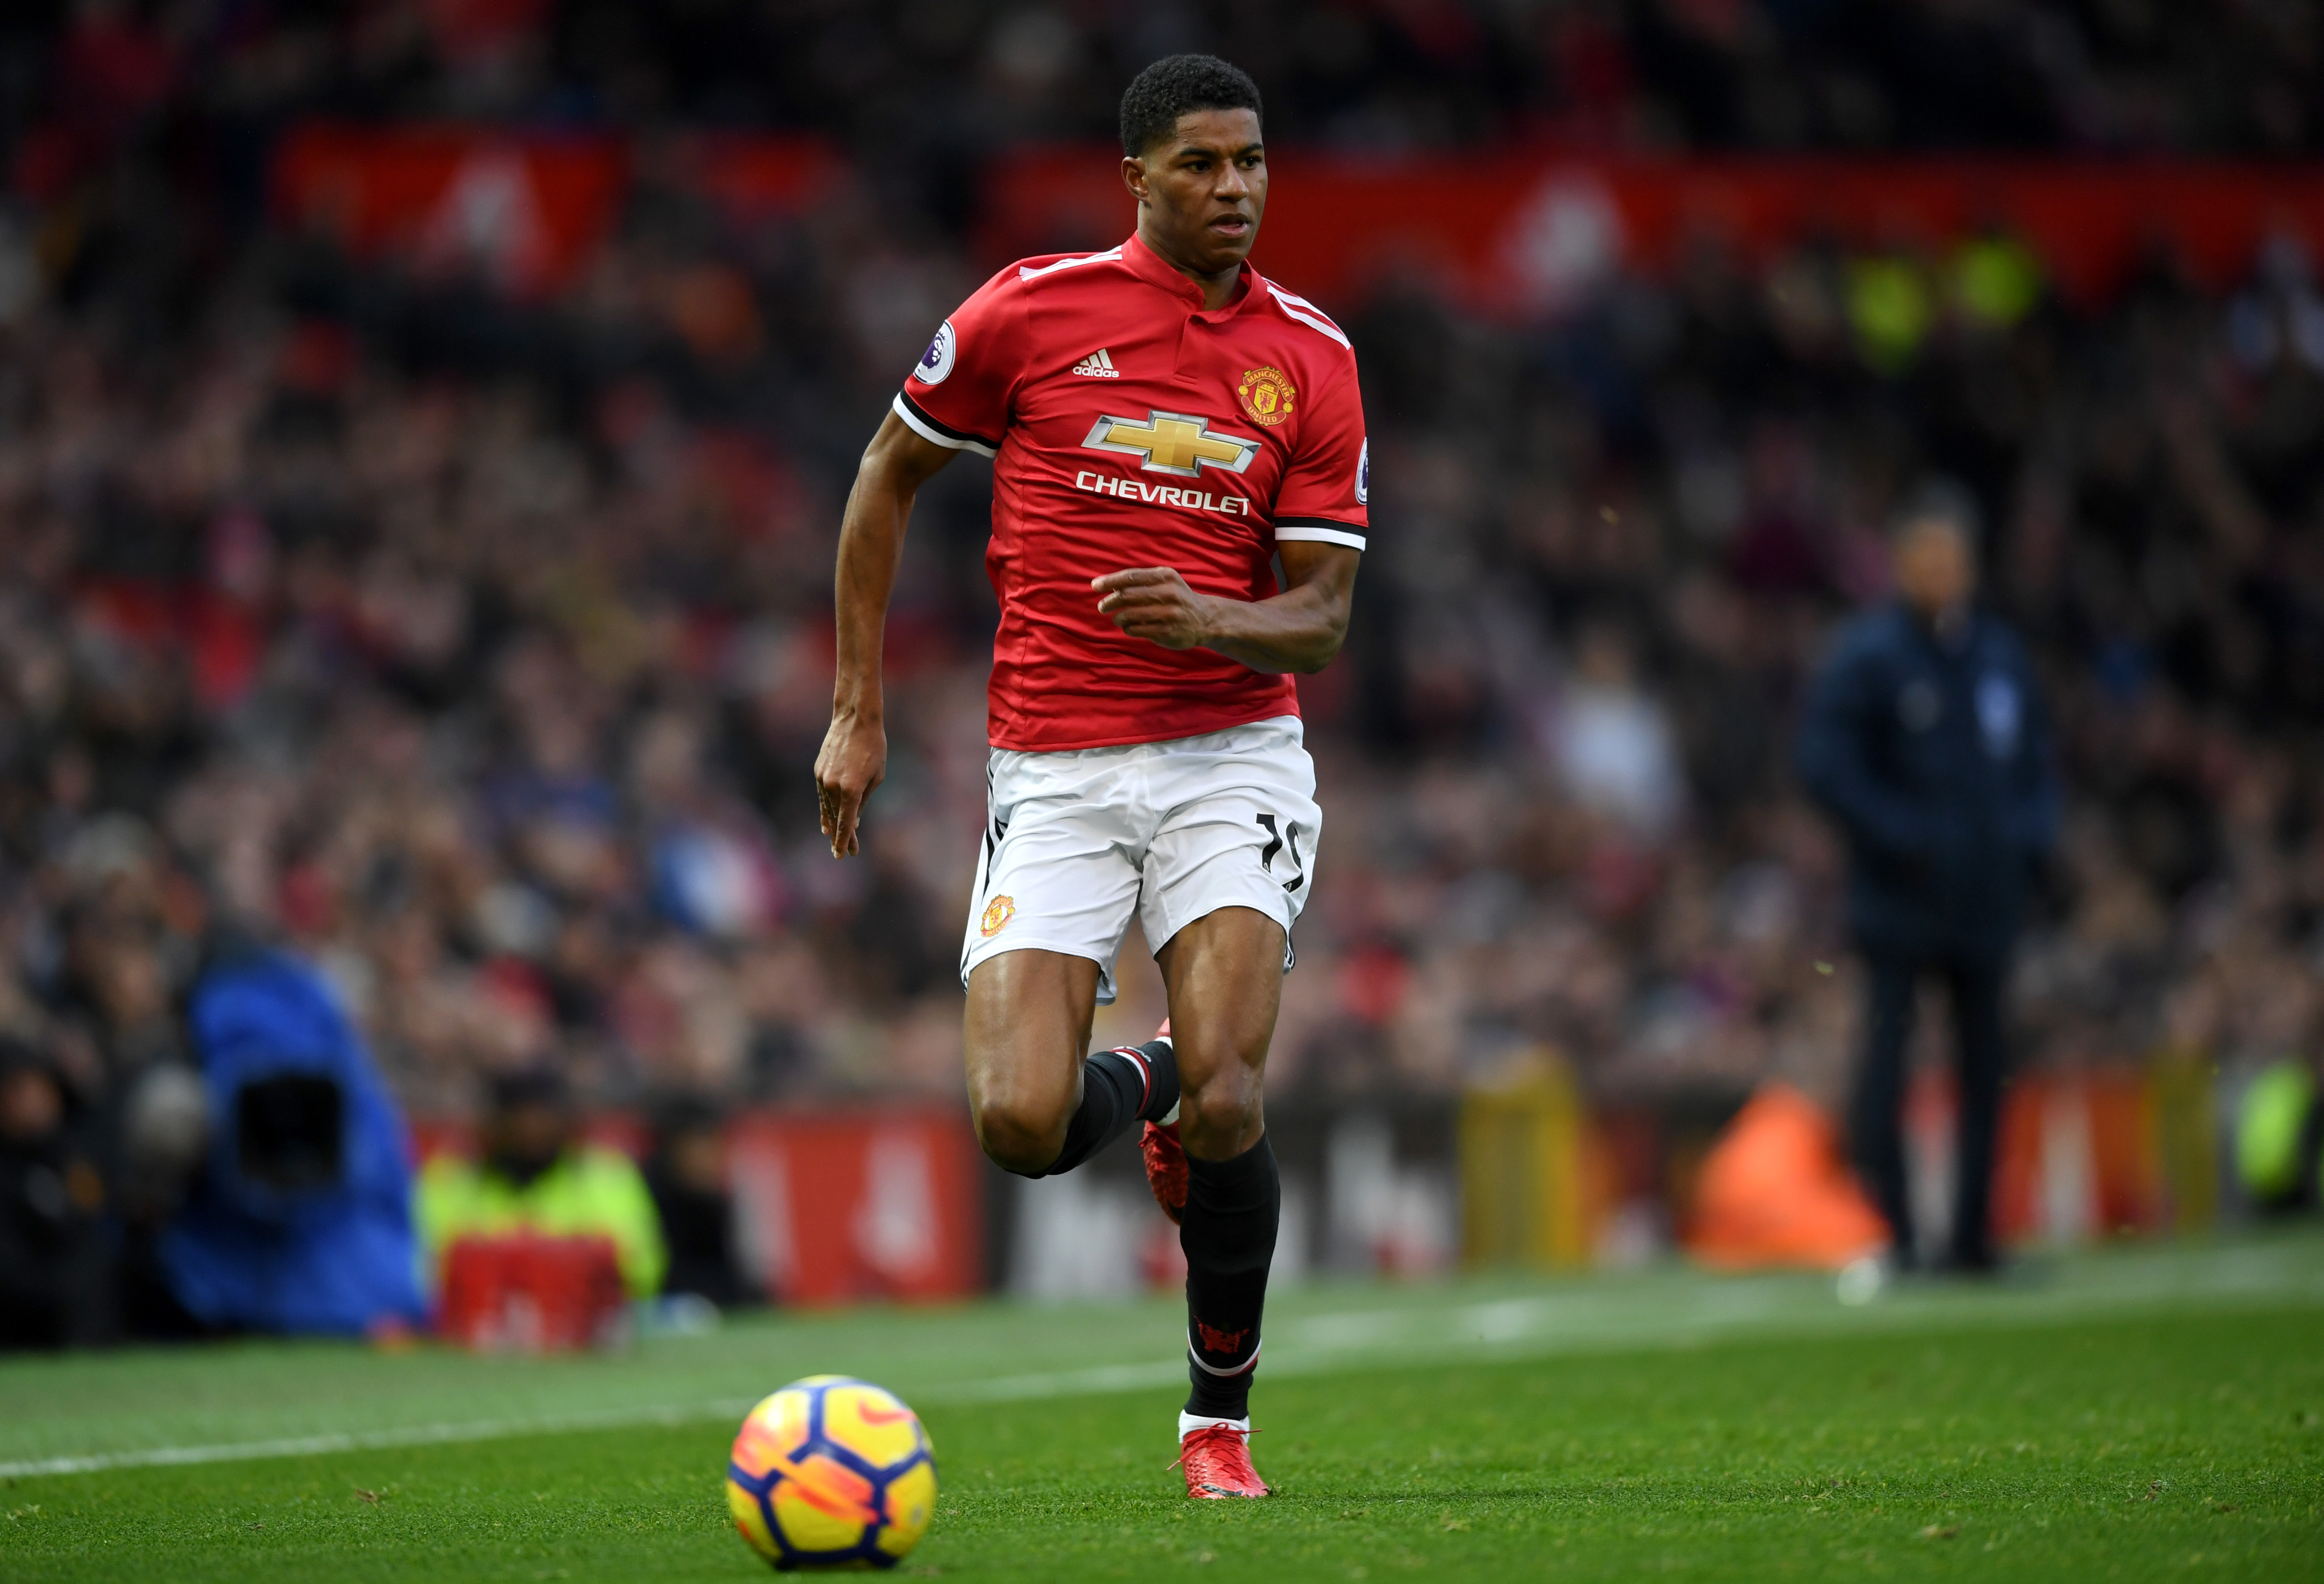 MANCHESTER, ENGLAND - NOVEMBER 25:  Marcus Rashford of Manchester United during the Premier League match between Manchester United and Brighton and Hove Albion at Old Trafford on November 25, 2017 in Manchester, England.  (Photo by Gareth Copley/Getty Images)